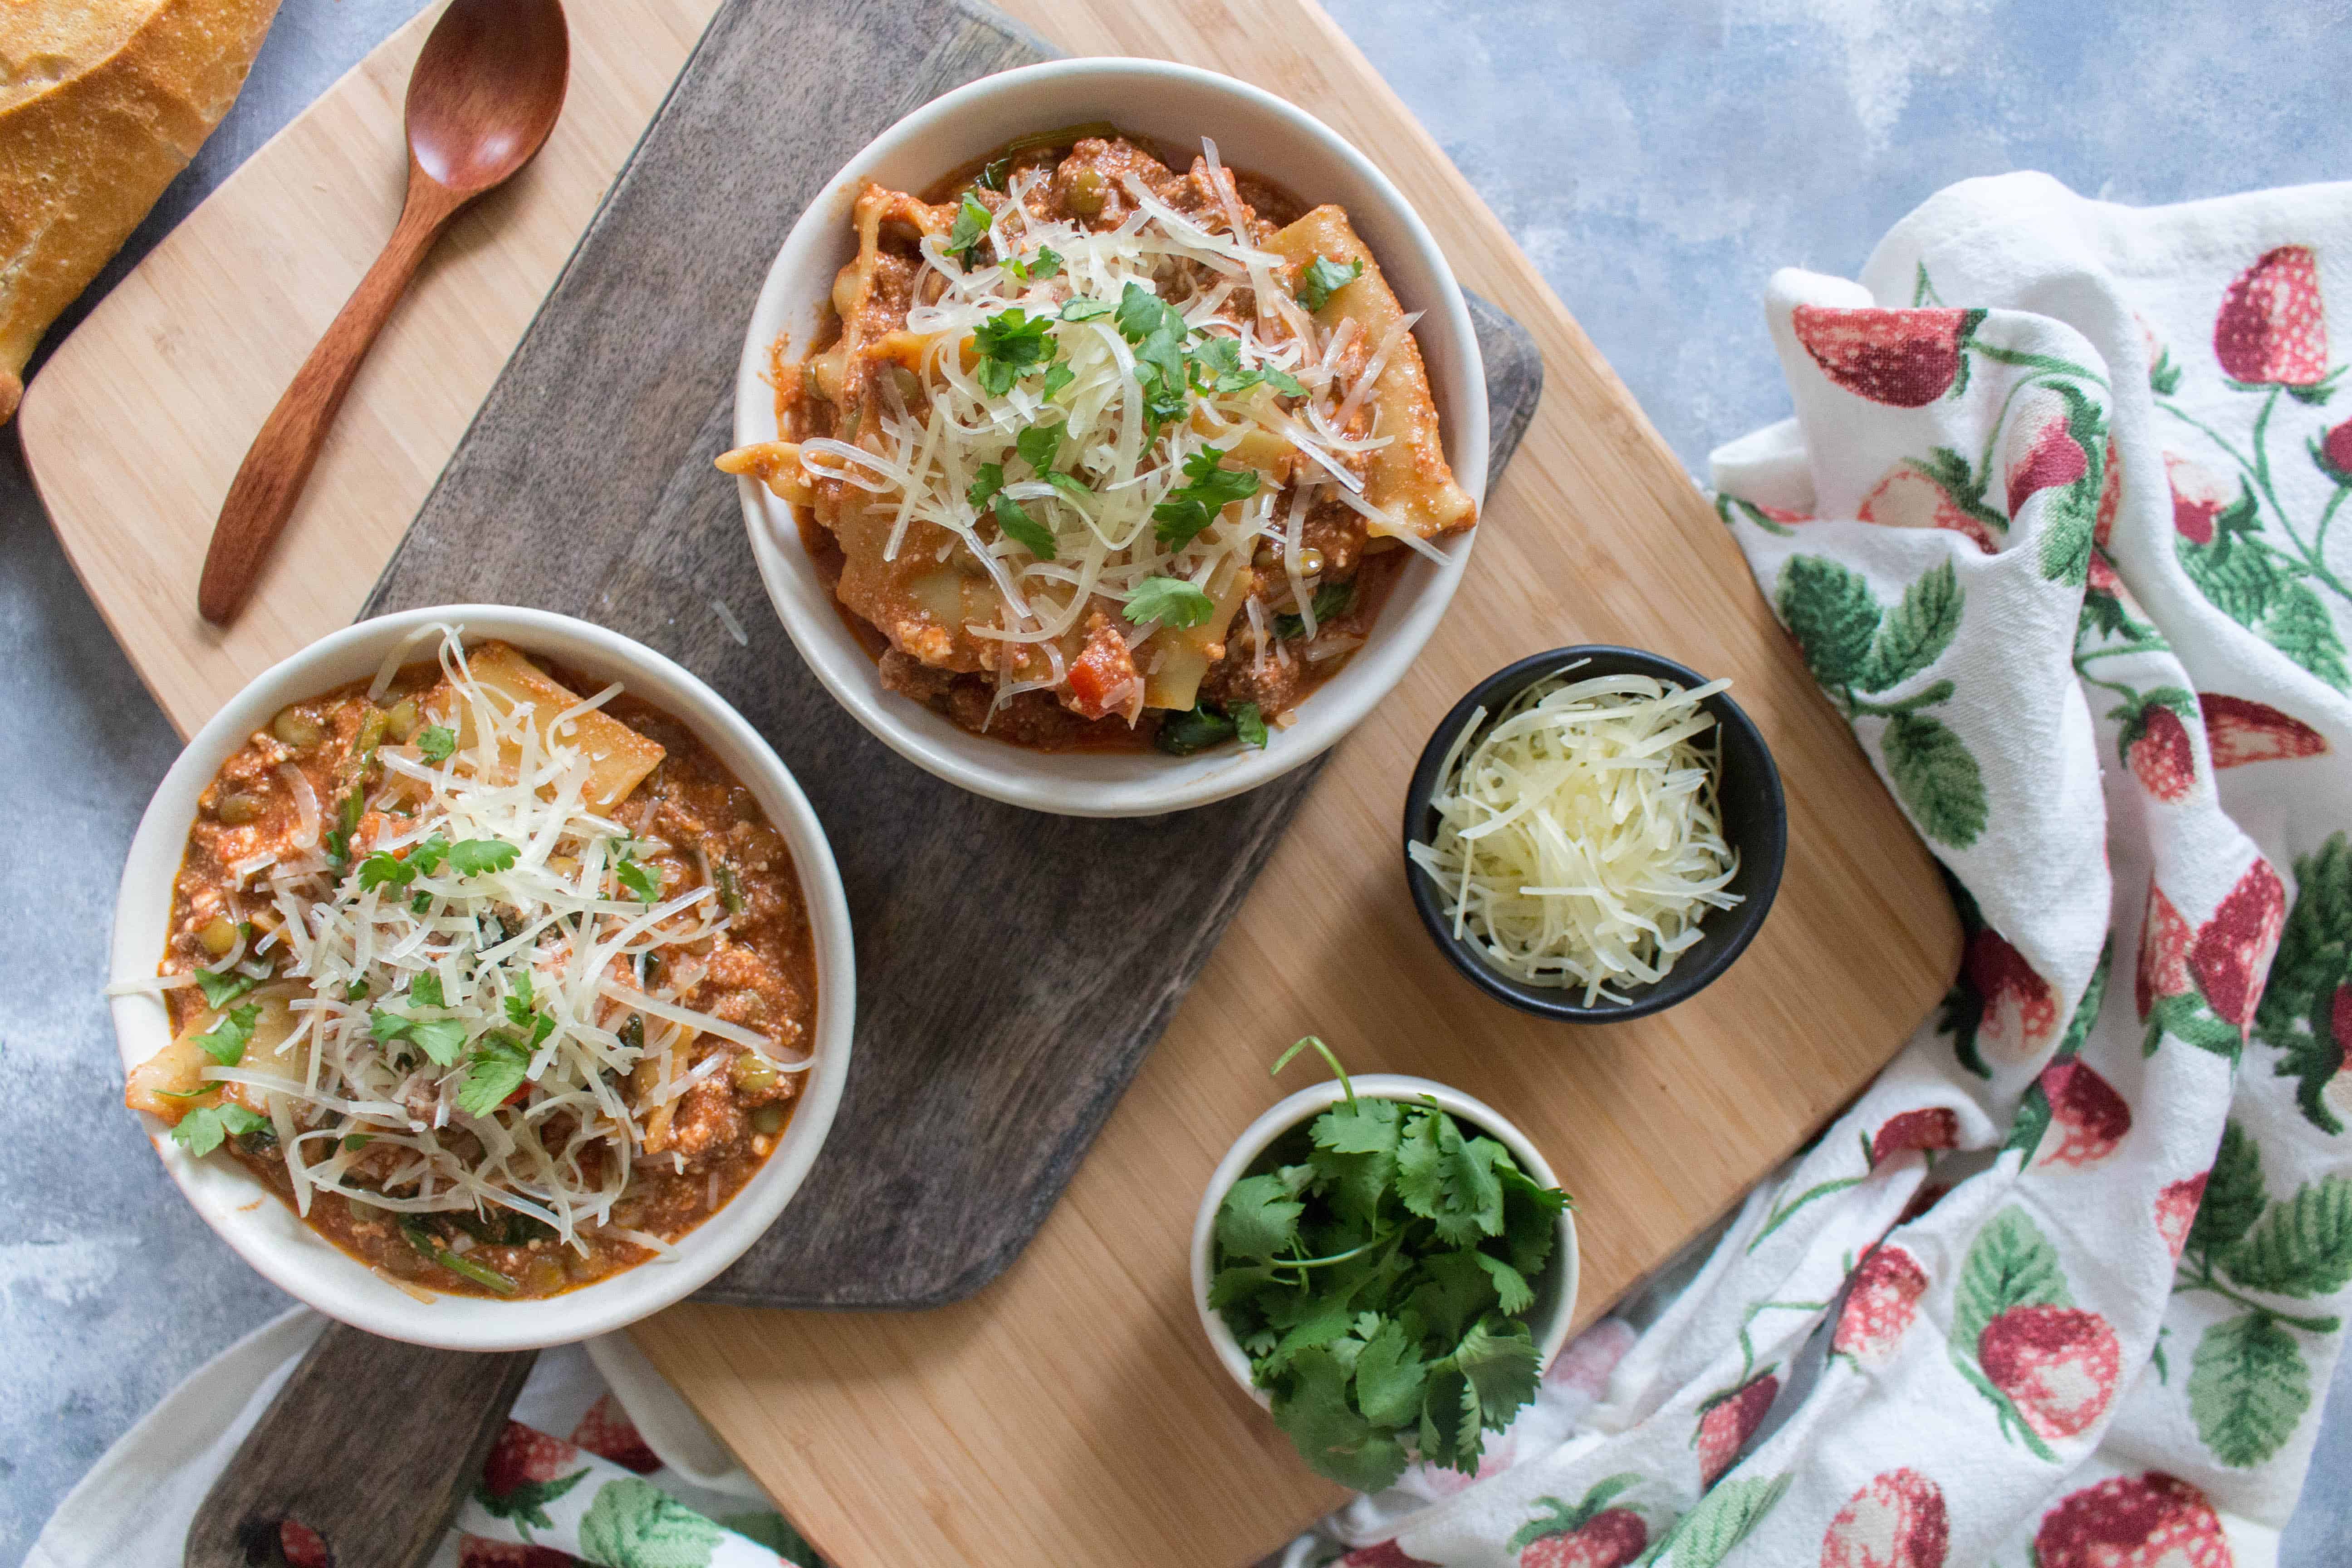 This super easy and Healthy Instant Pot Lasagna Soup will have you grabbing seconds! This lasagna soup is  so comforting and delicious - plus it's filled with extra vegetables! This healthy instant pot lasagna soup will take you under an hour with an Instant Pot! #InstantPot #InstantPotRecipes